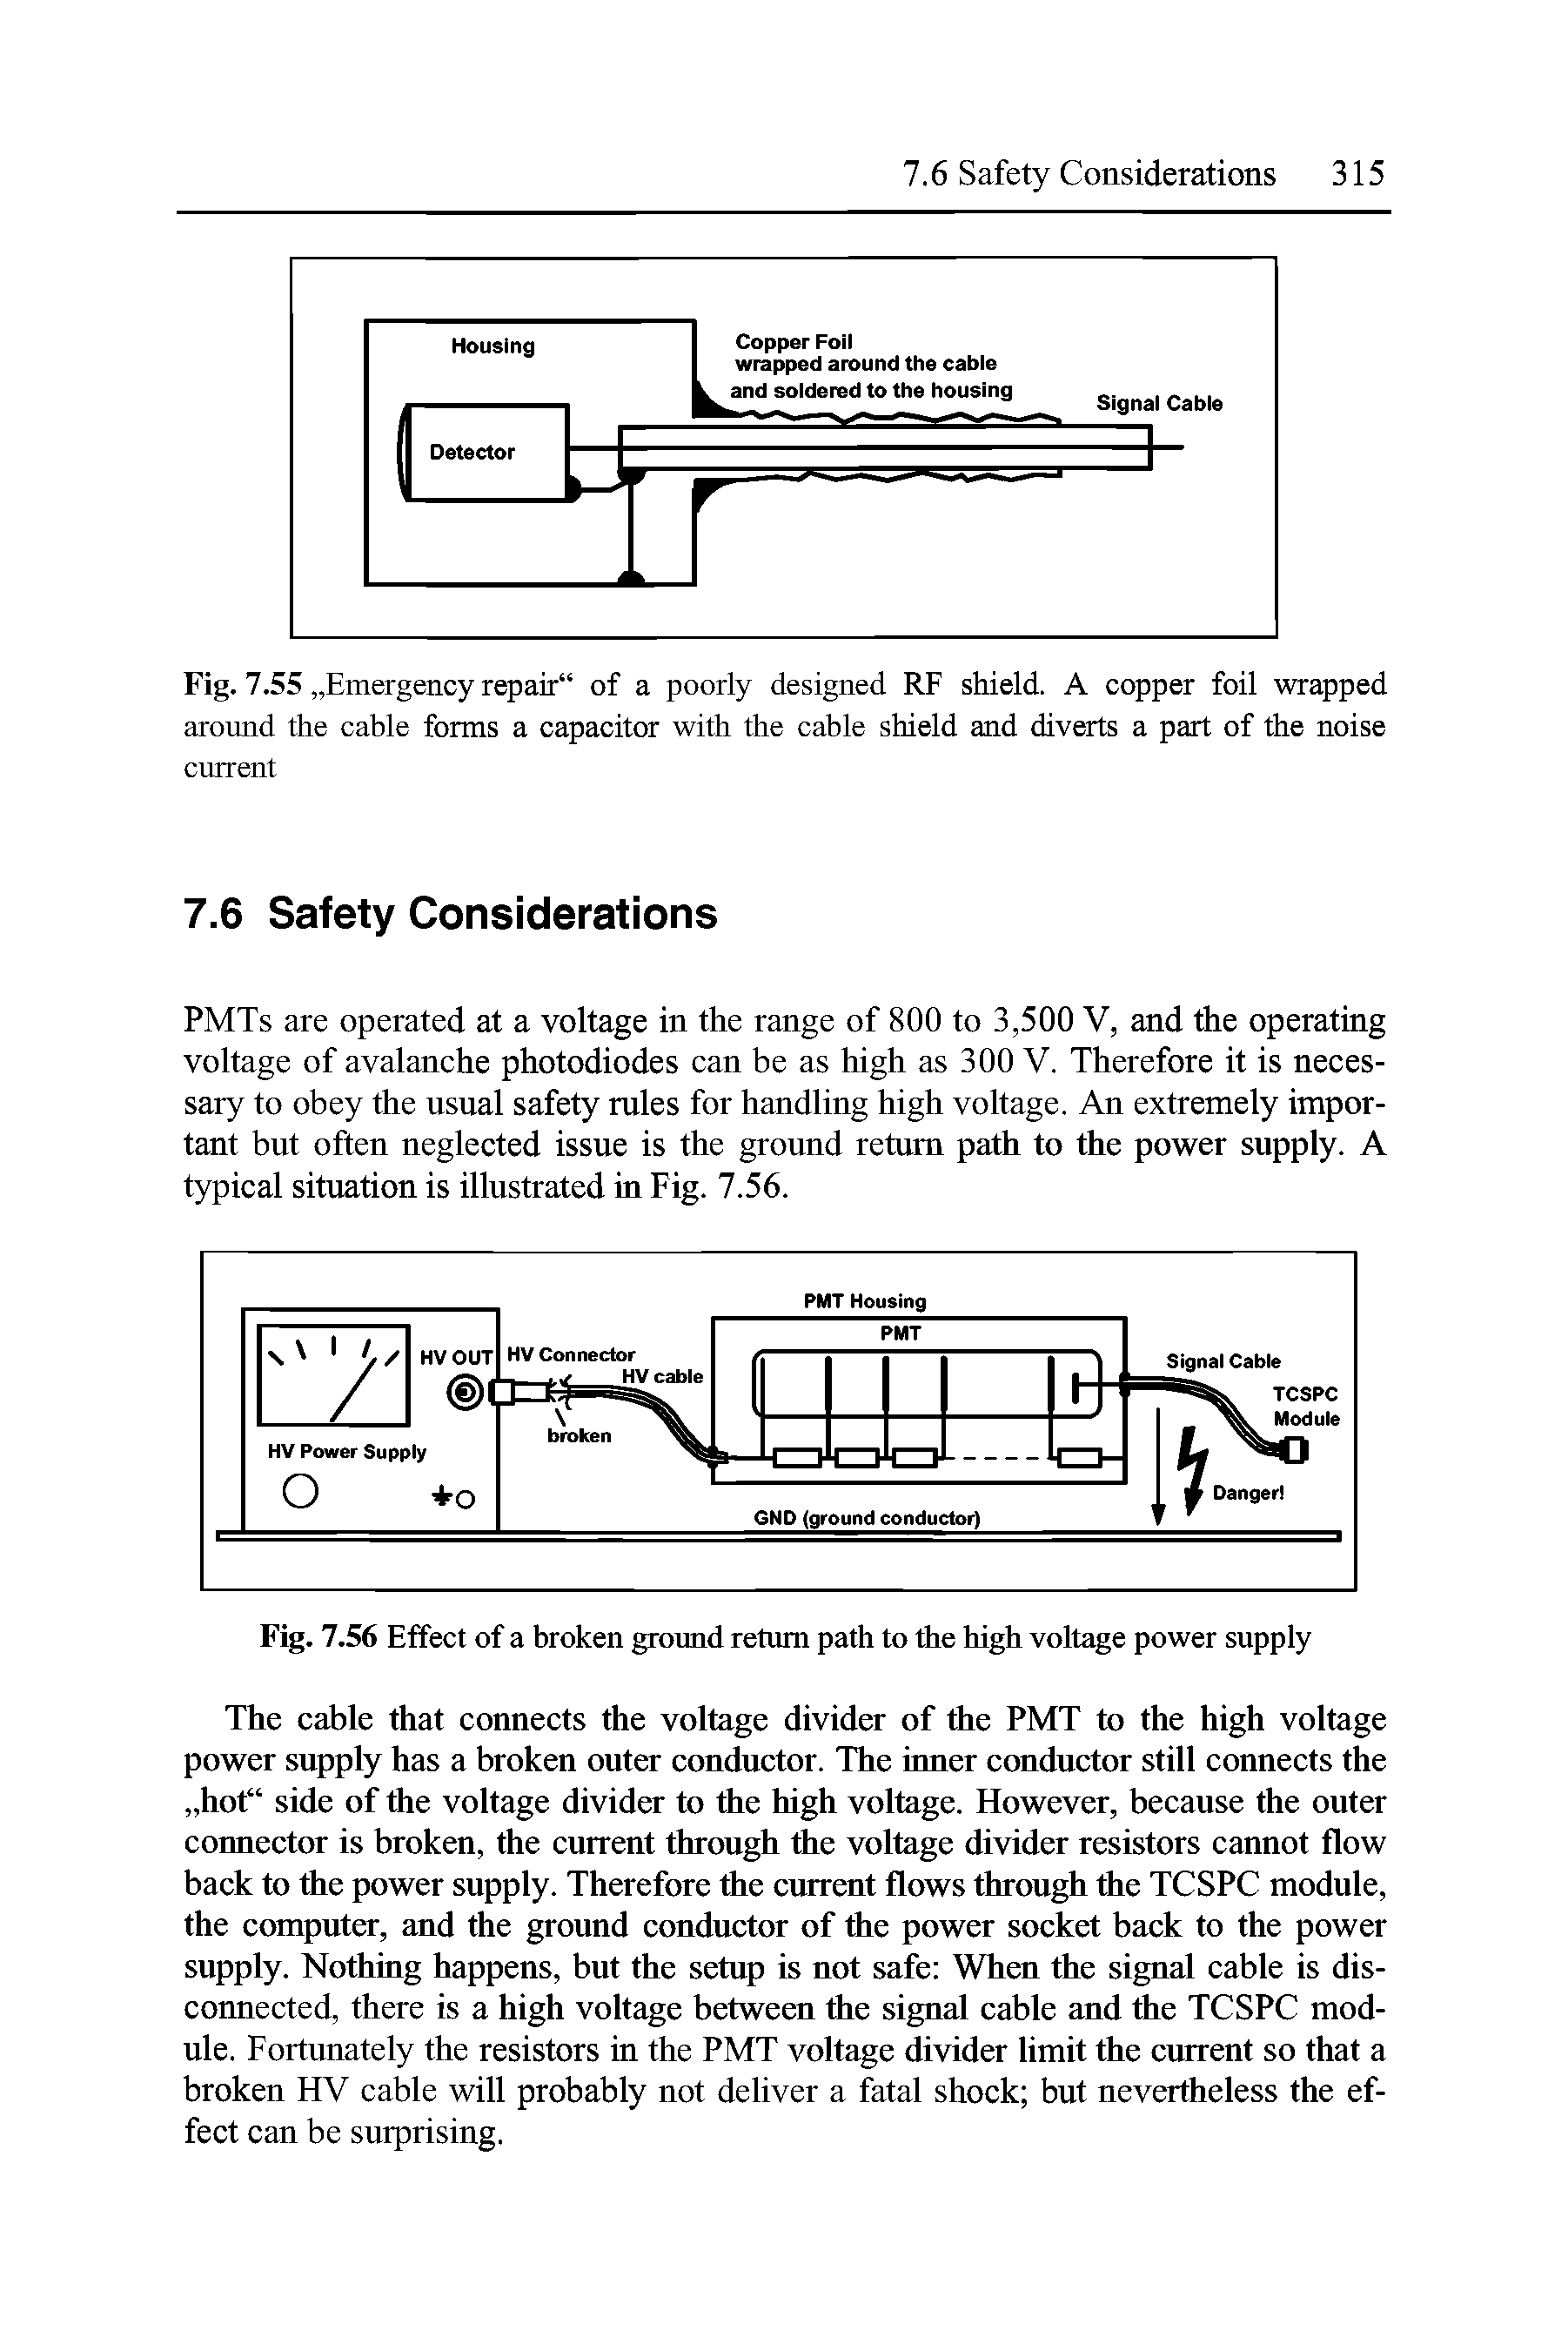 Fig. 7.55. .Emergency repair" of a poorly designed RF shield. A copper foil wrapped around the cable forms a capacitor with the cable shield and diverts a part of the noise current...